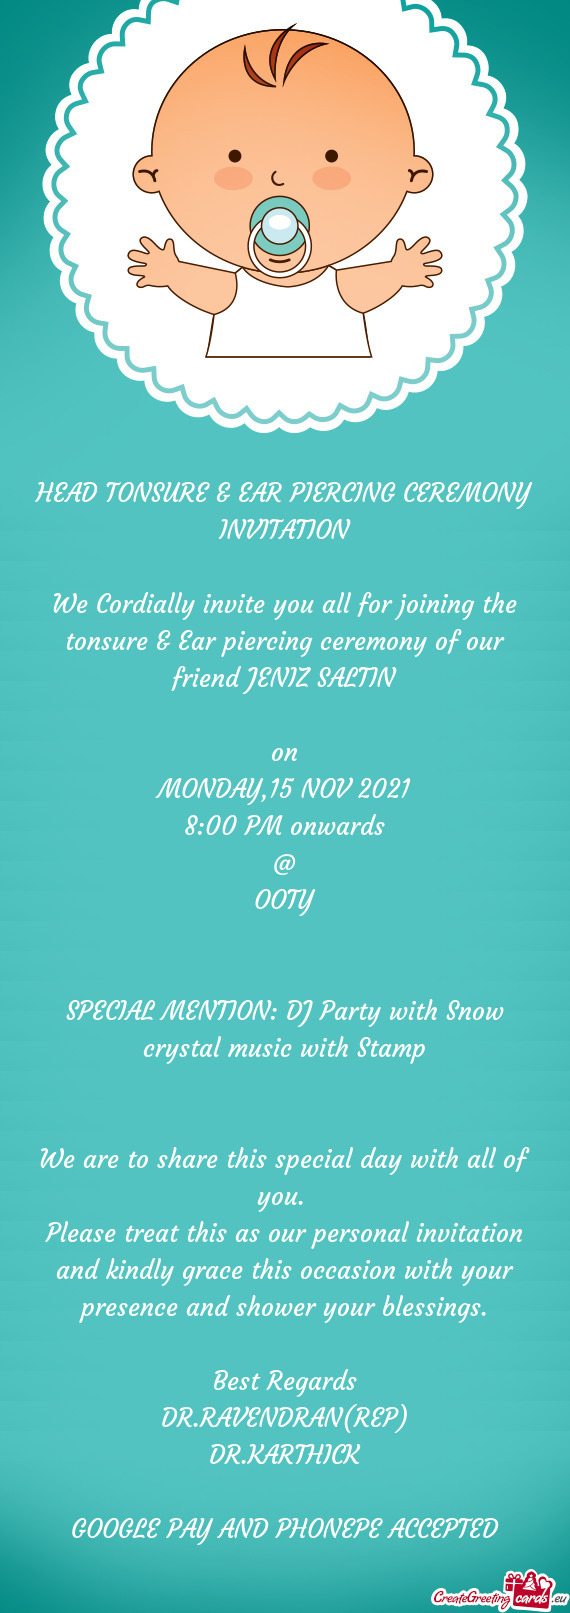 We Cordially invite you all for joining the tonsure & Ear piercing ceremony of our friend JENIZ SALT